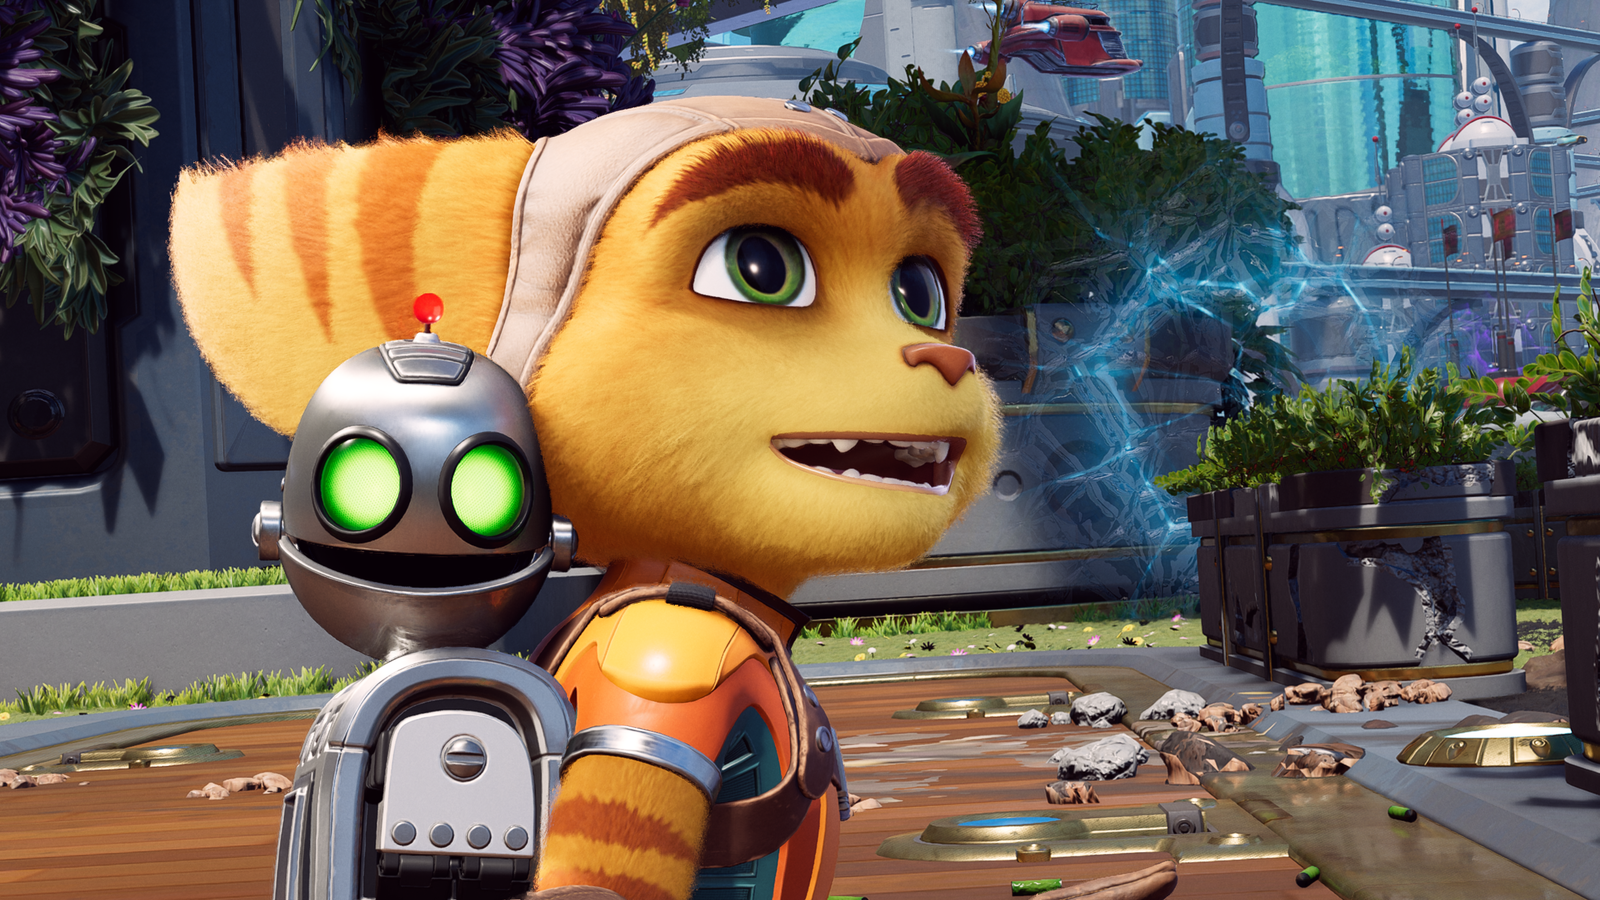 Ratchet and Clank: Rift Apart Announced for PS5